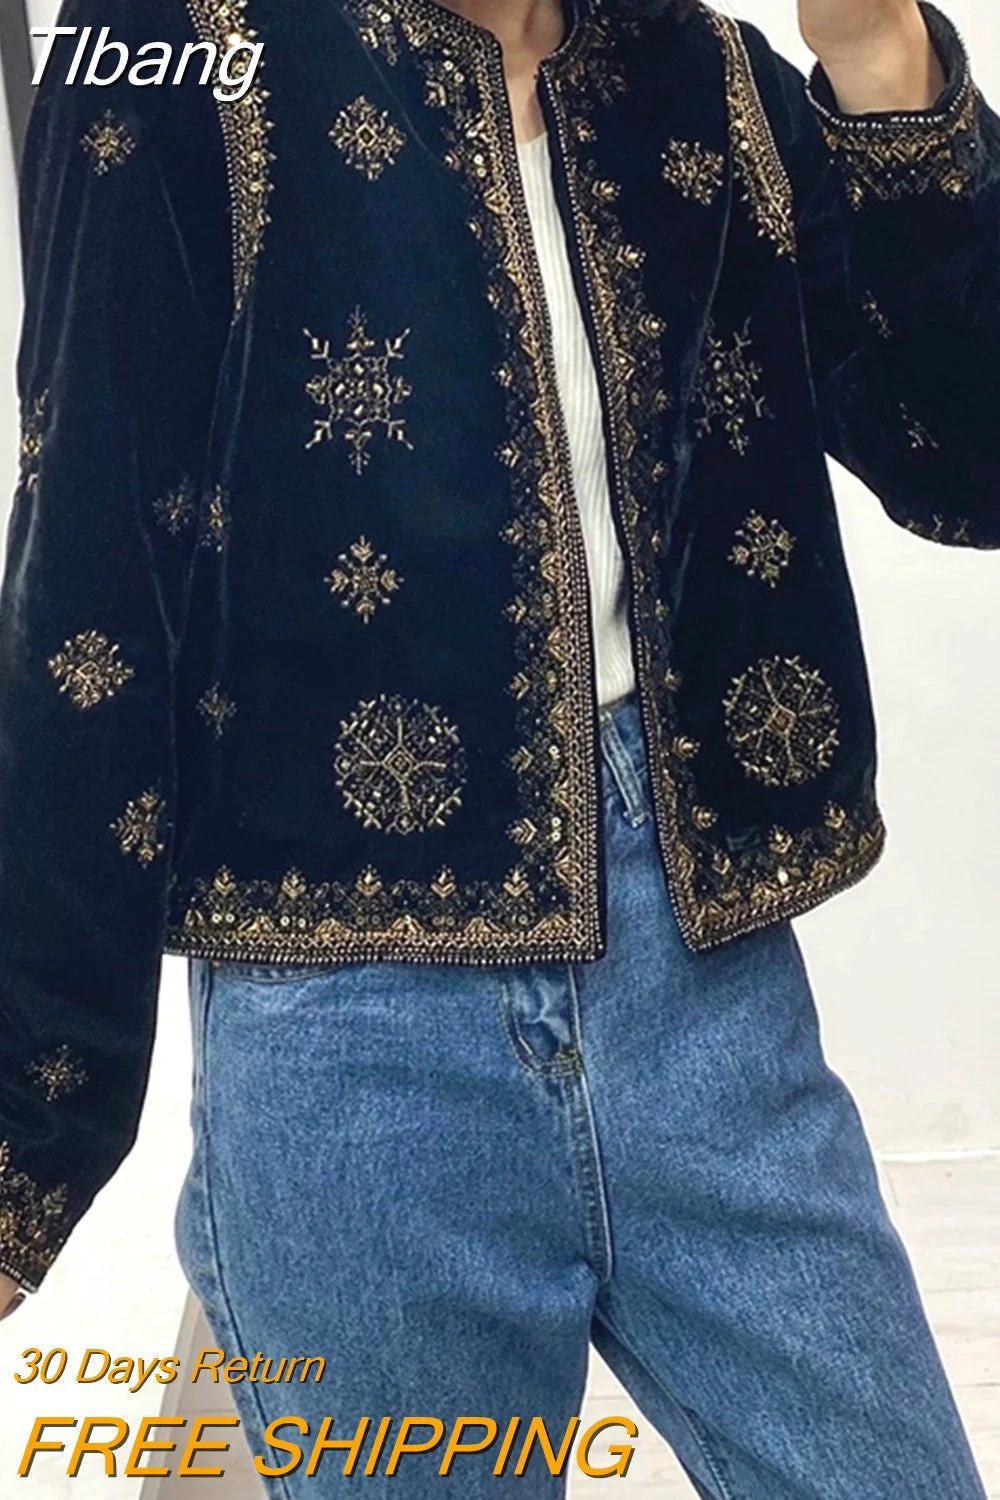 Tlbang Women's Replica Ethnic Style Heavy Industrial Embroidered Sequin Decorated Jacket Velvet Short Cardigan Autumn and Winter Women